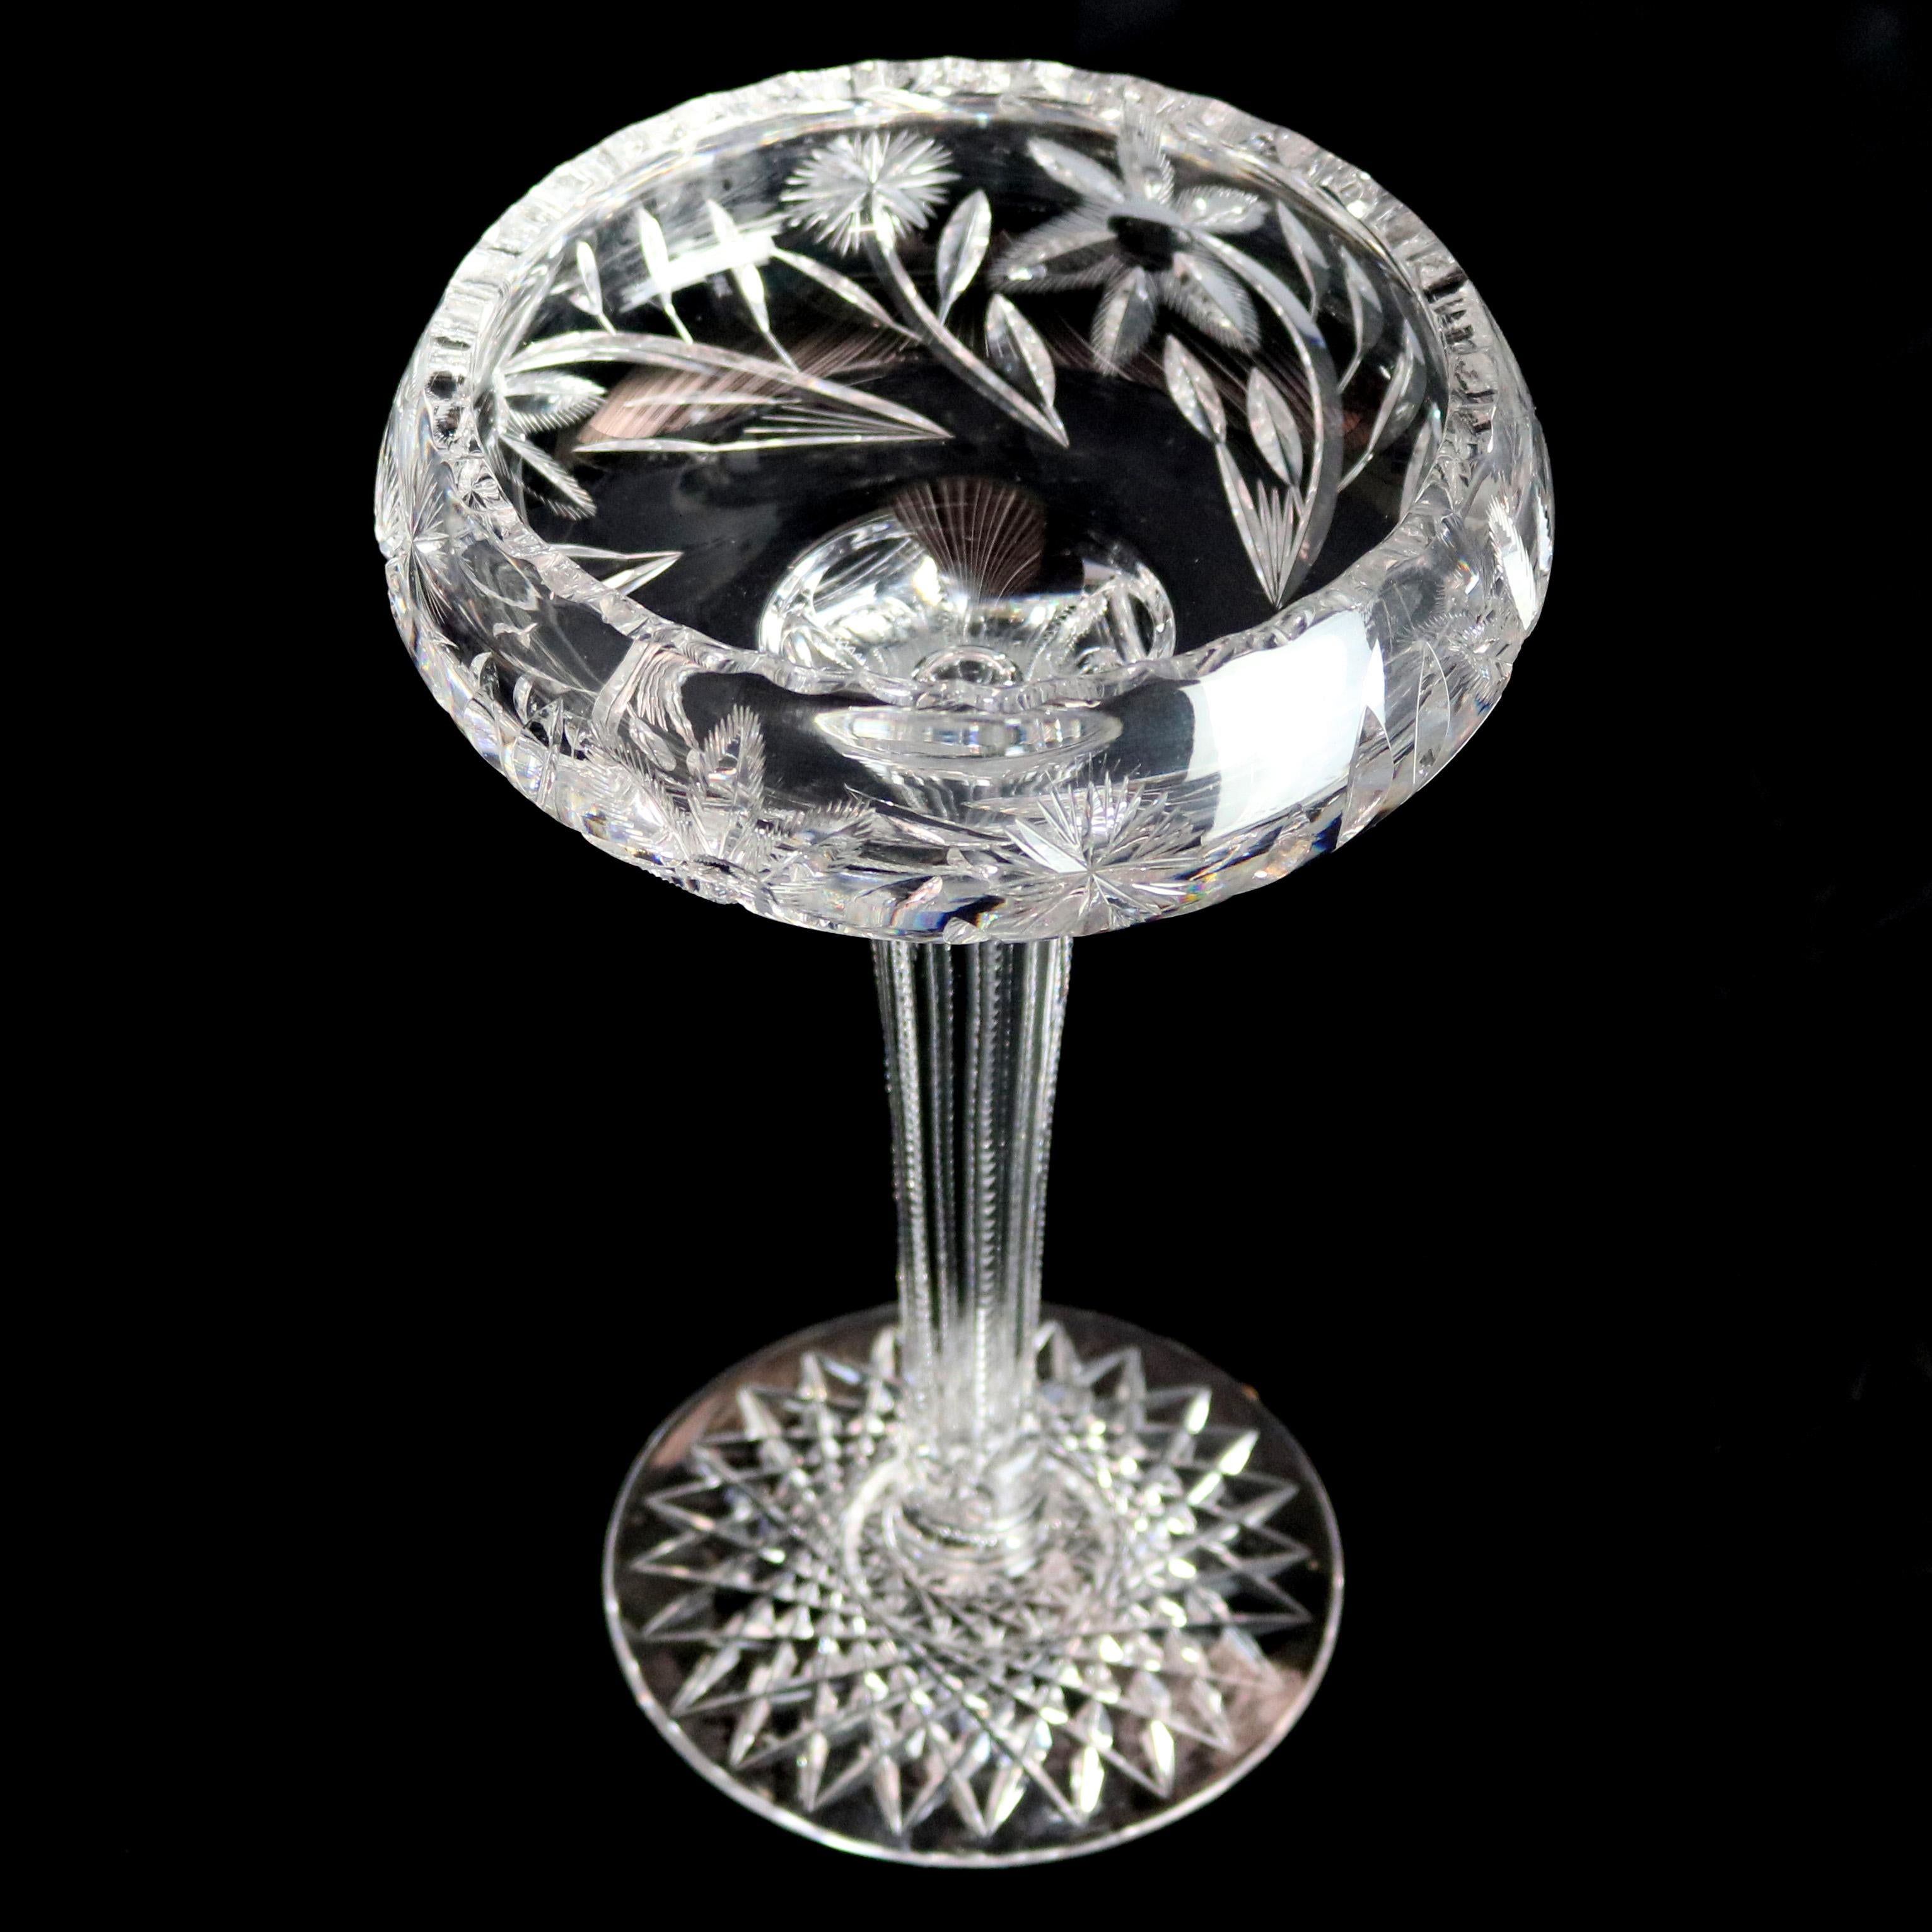 A vintage American brilliant cut glass compote offers bowl with floral design raised on tapered elongated column with diamond cut base, circa 1940.

Measures: 9.25